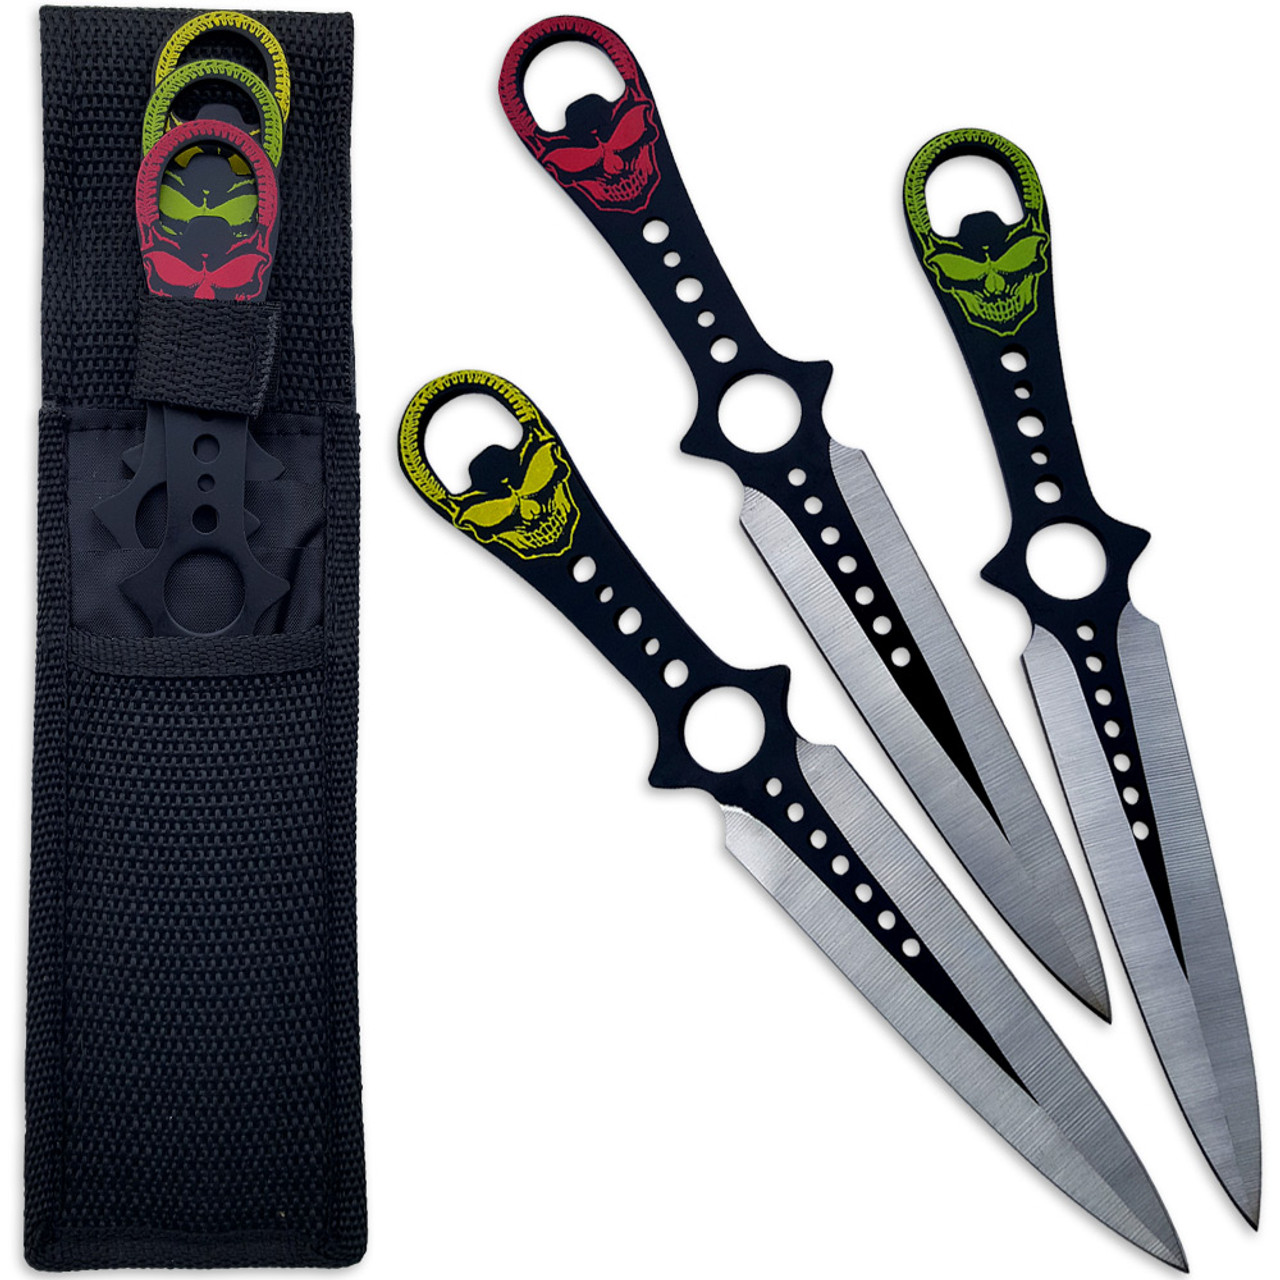 6 NEW! BLACK Skulls THROWING KNIVES Throw Knife WARTECH Gothic Blade Set  of 3